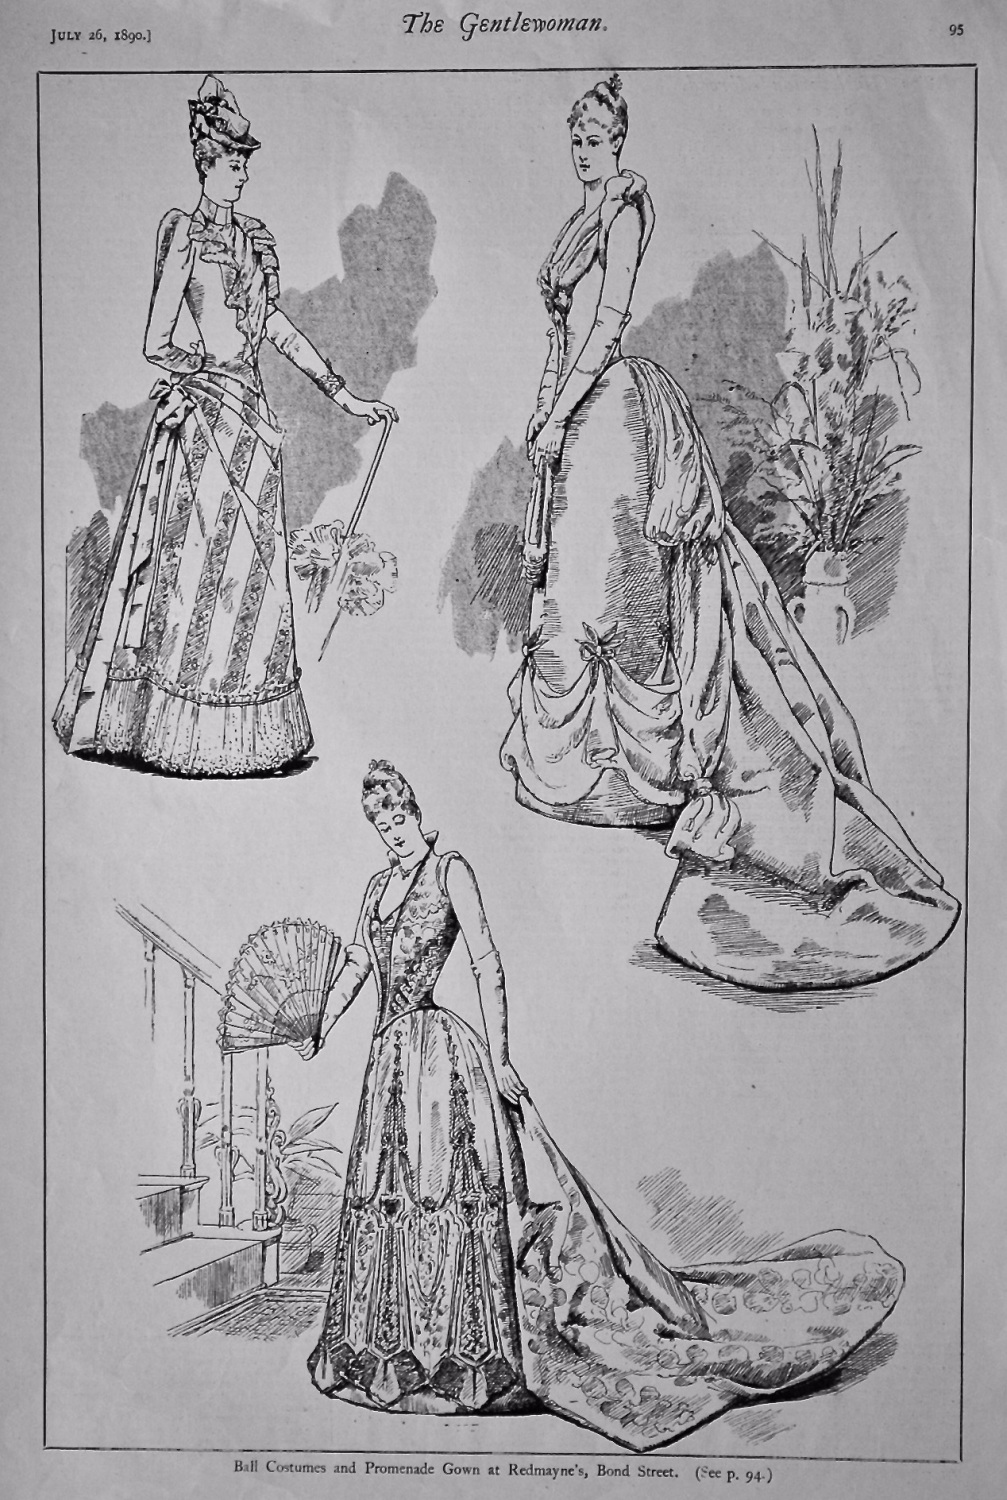 Ball Costumes and Promenade Gown at Redmayne's, Bond Street.  1890.